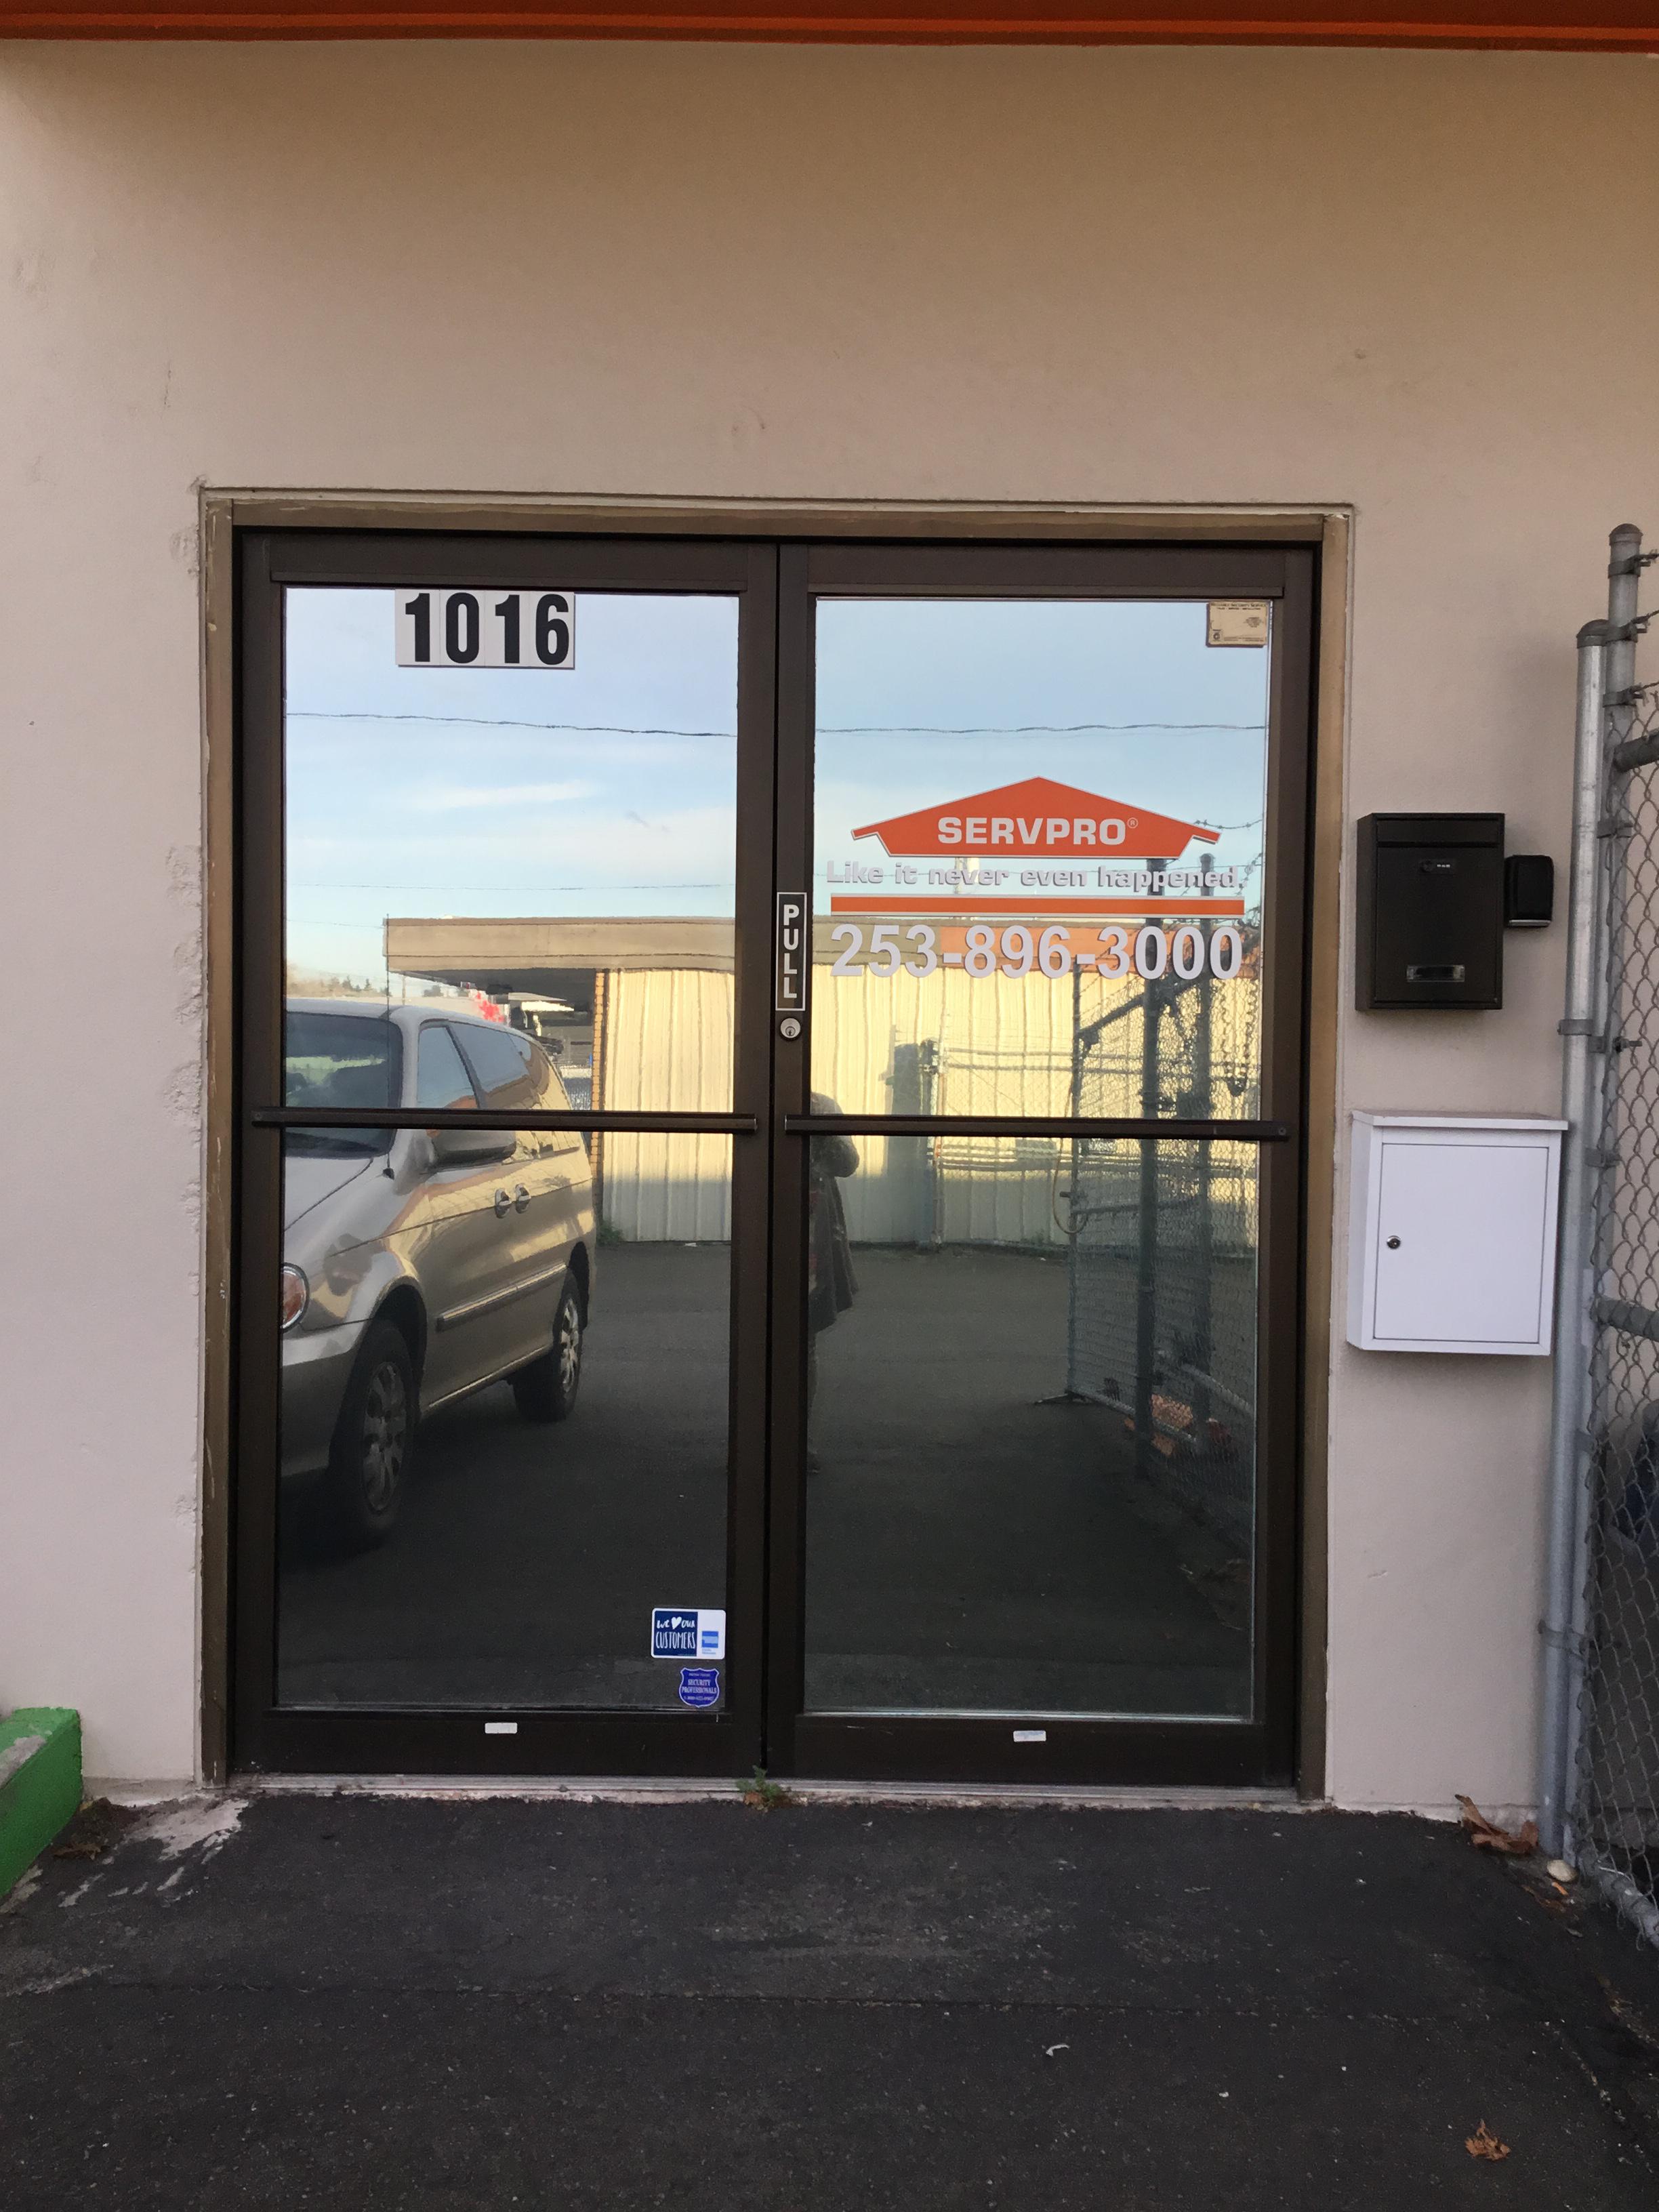 Welcome to Servpro of Tacoma!